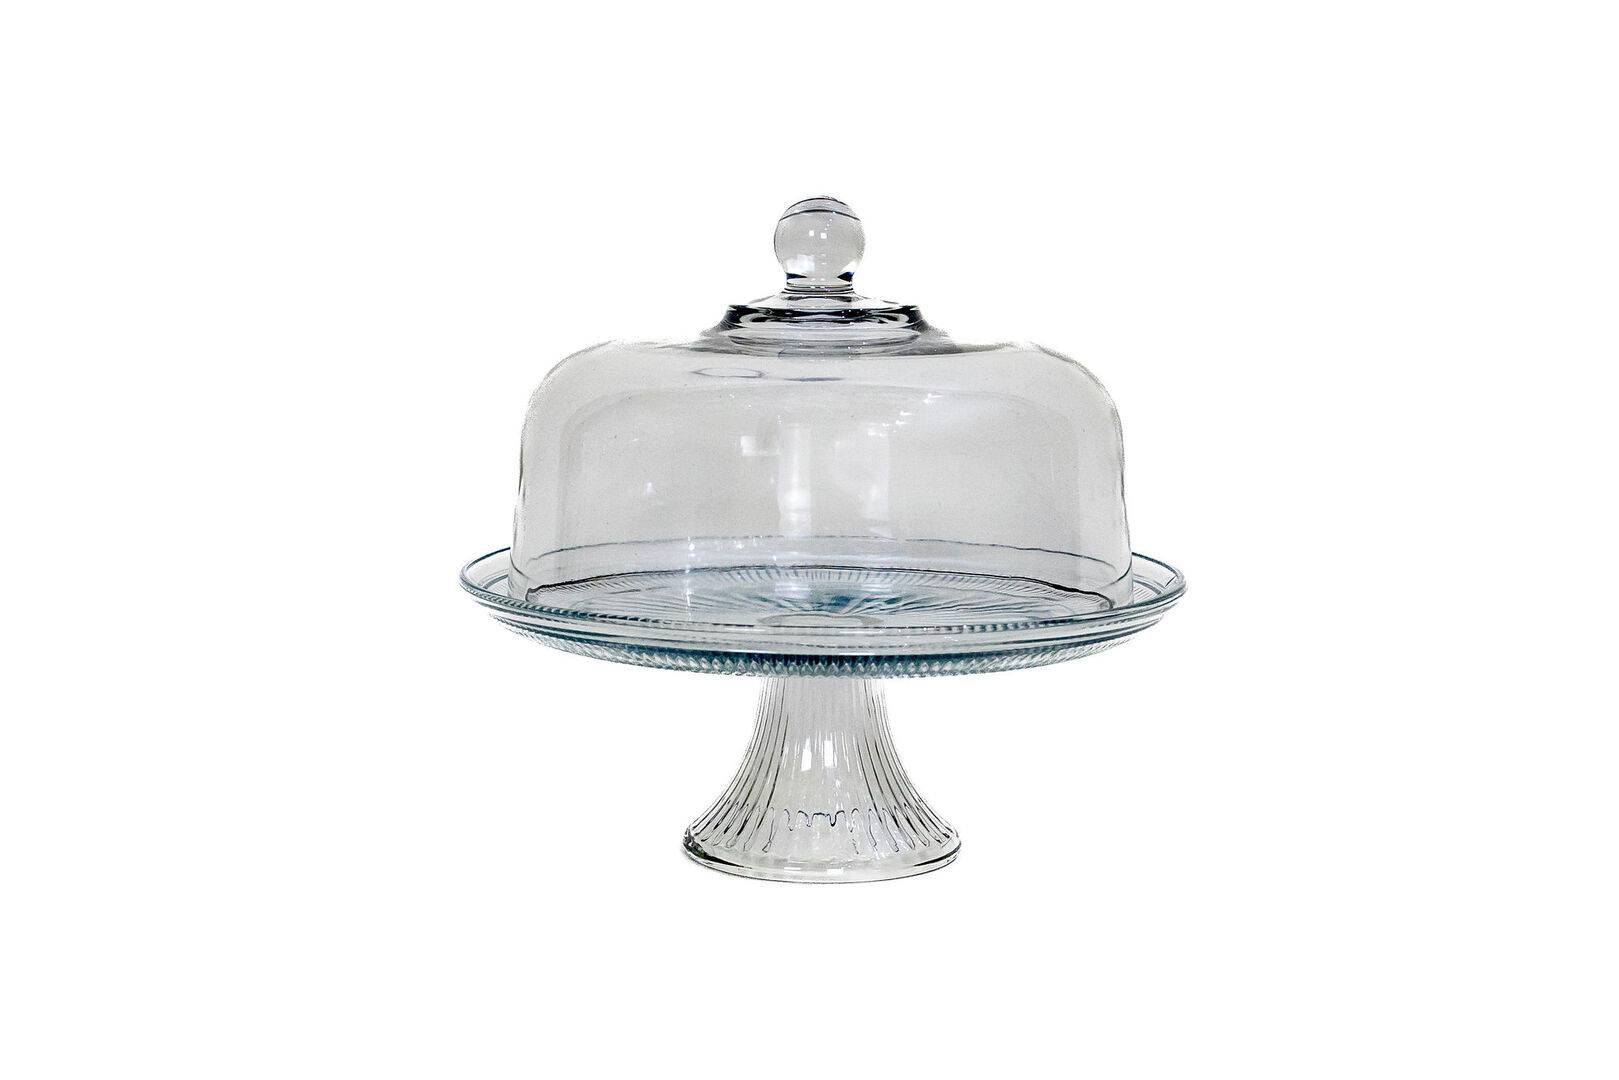 Cake stand with dome lid